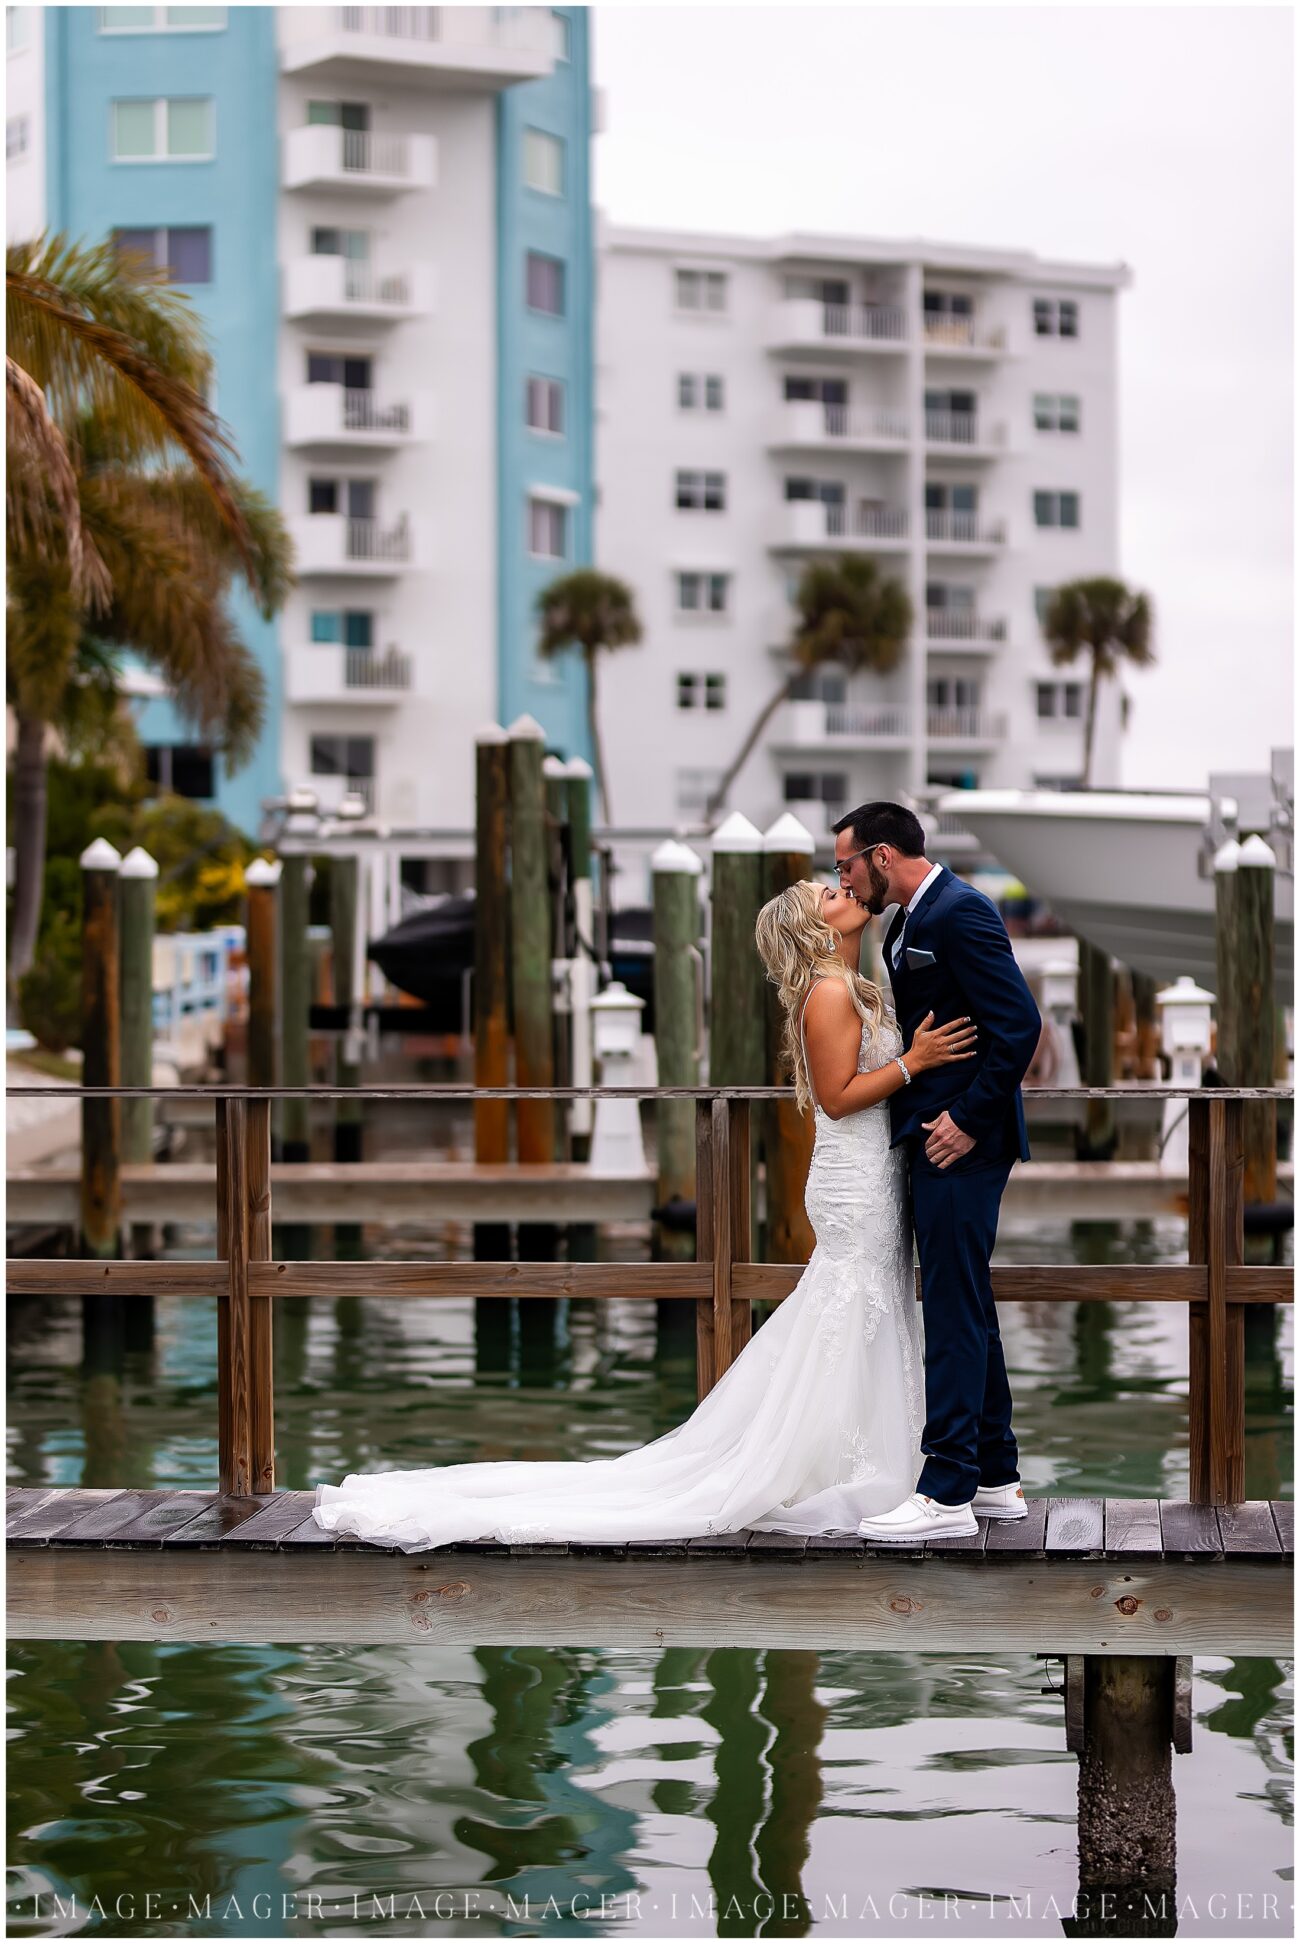 Kinze and Devin's first look unfolds on The West Events docks, raindrops adding a touch of magic to their love story.